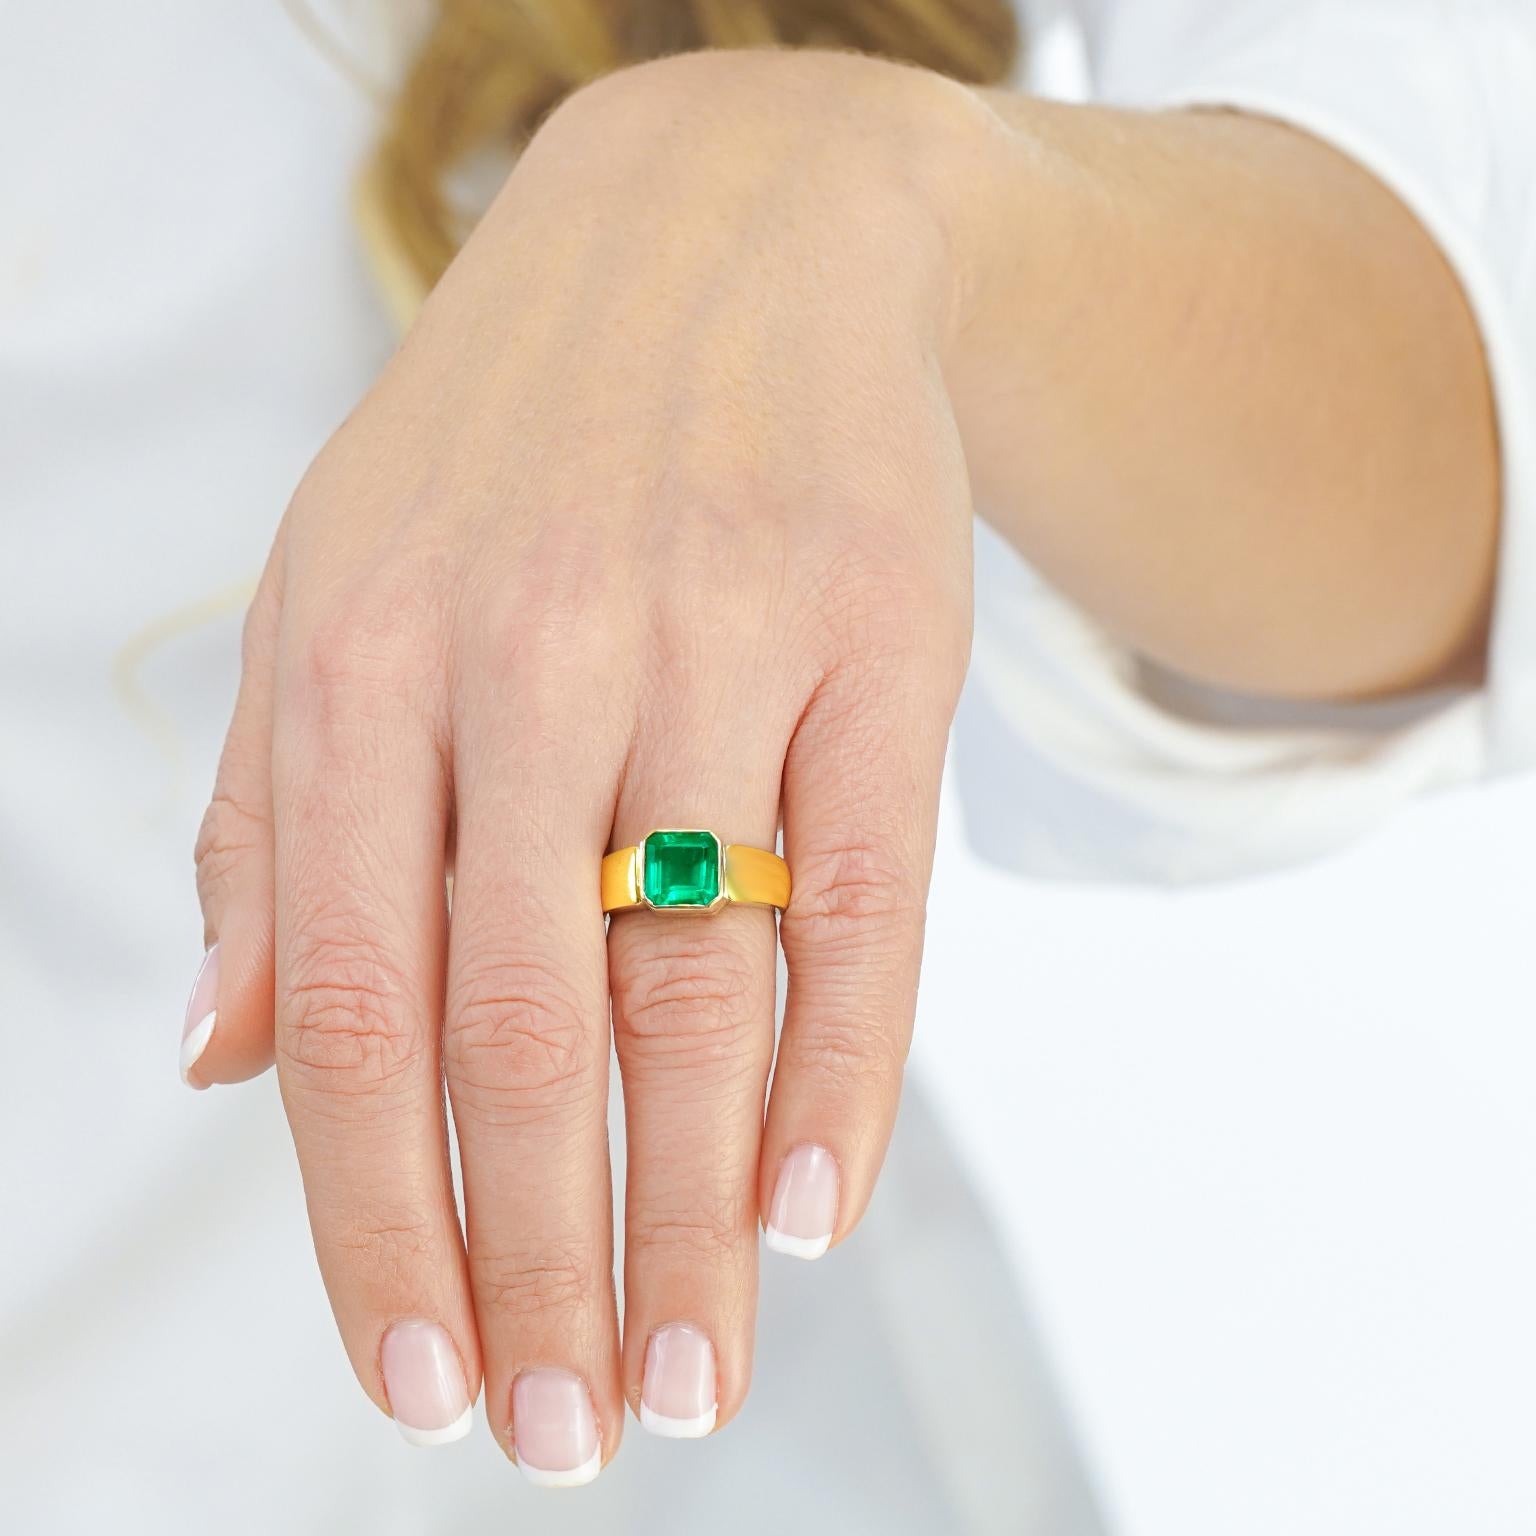 Sixties Emerald Ring In Excellent Condition For Sale In Litchfield, CT